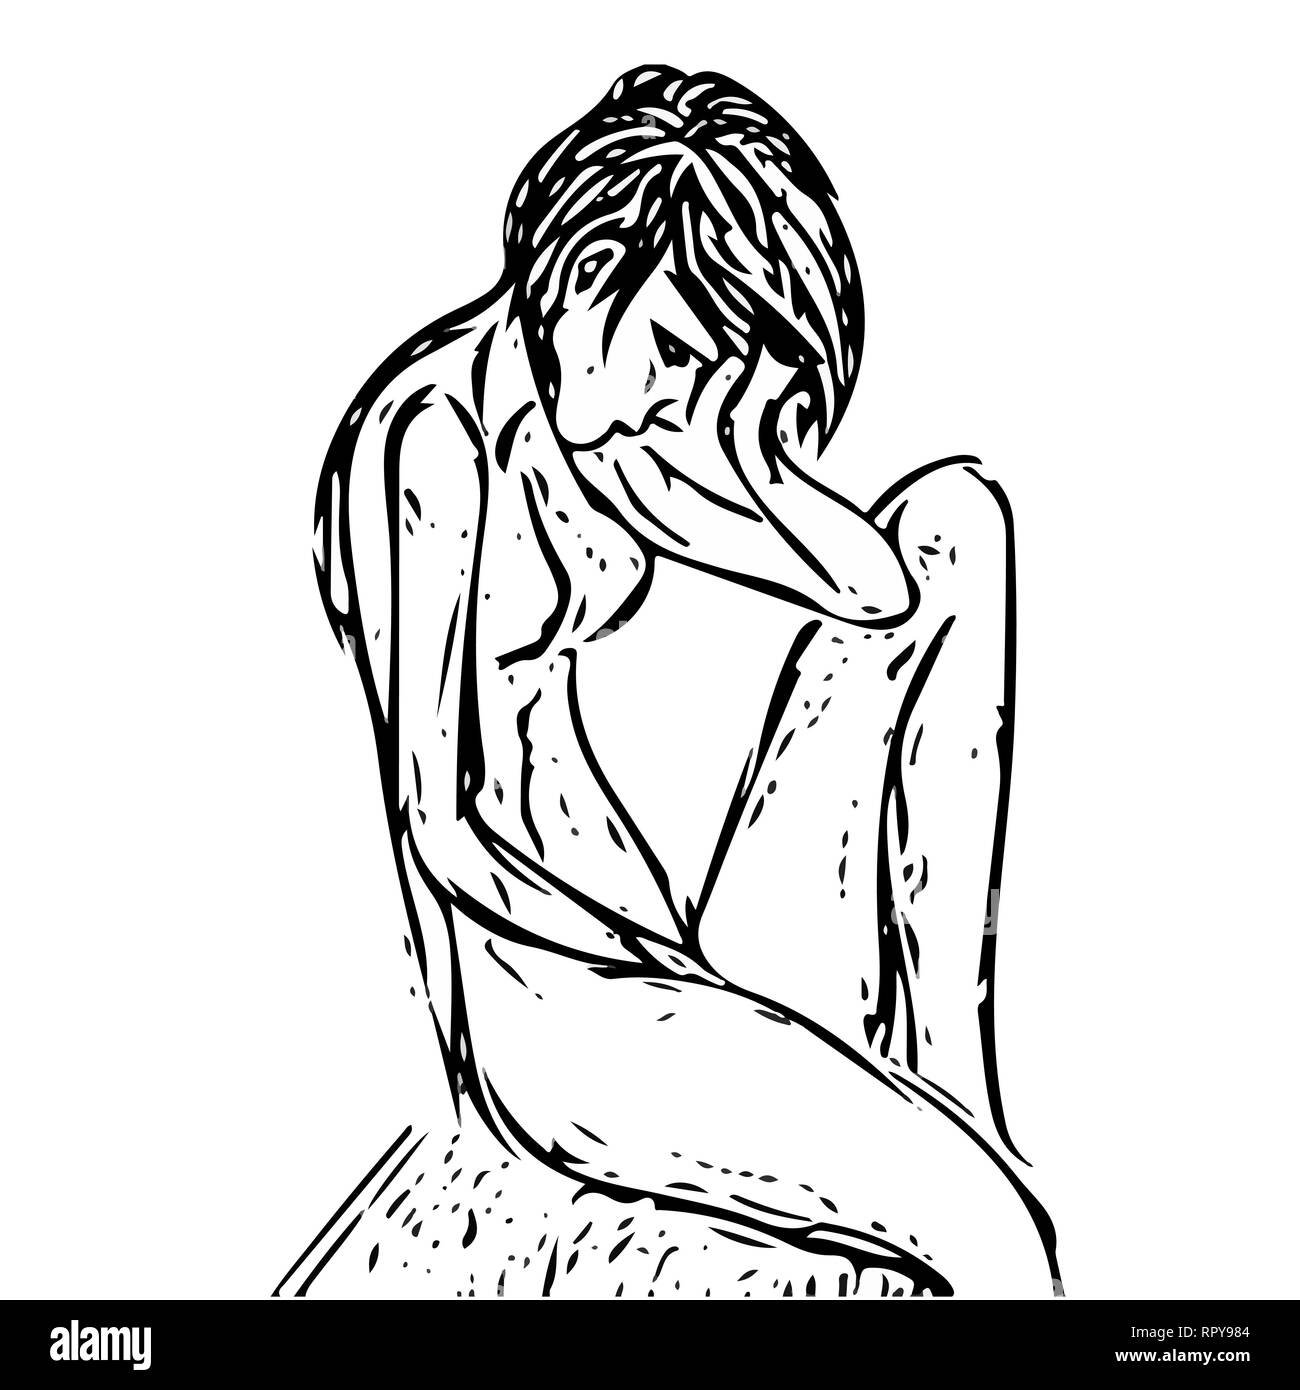 drawn girl sitting obektiv head on his hand and sad. vector drawing with black lines on white isolated background. Stock Vector